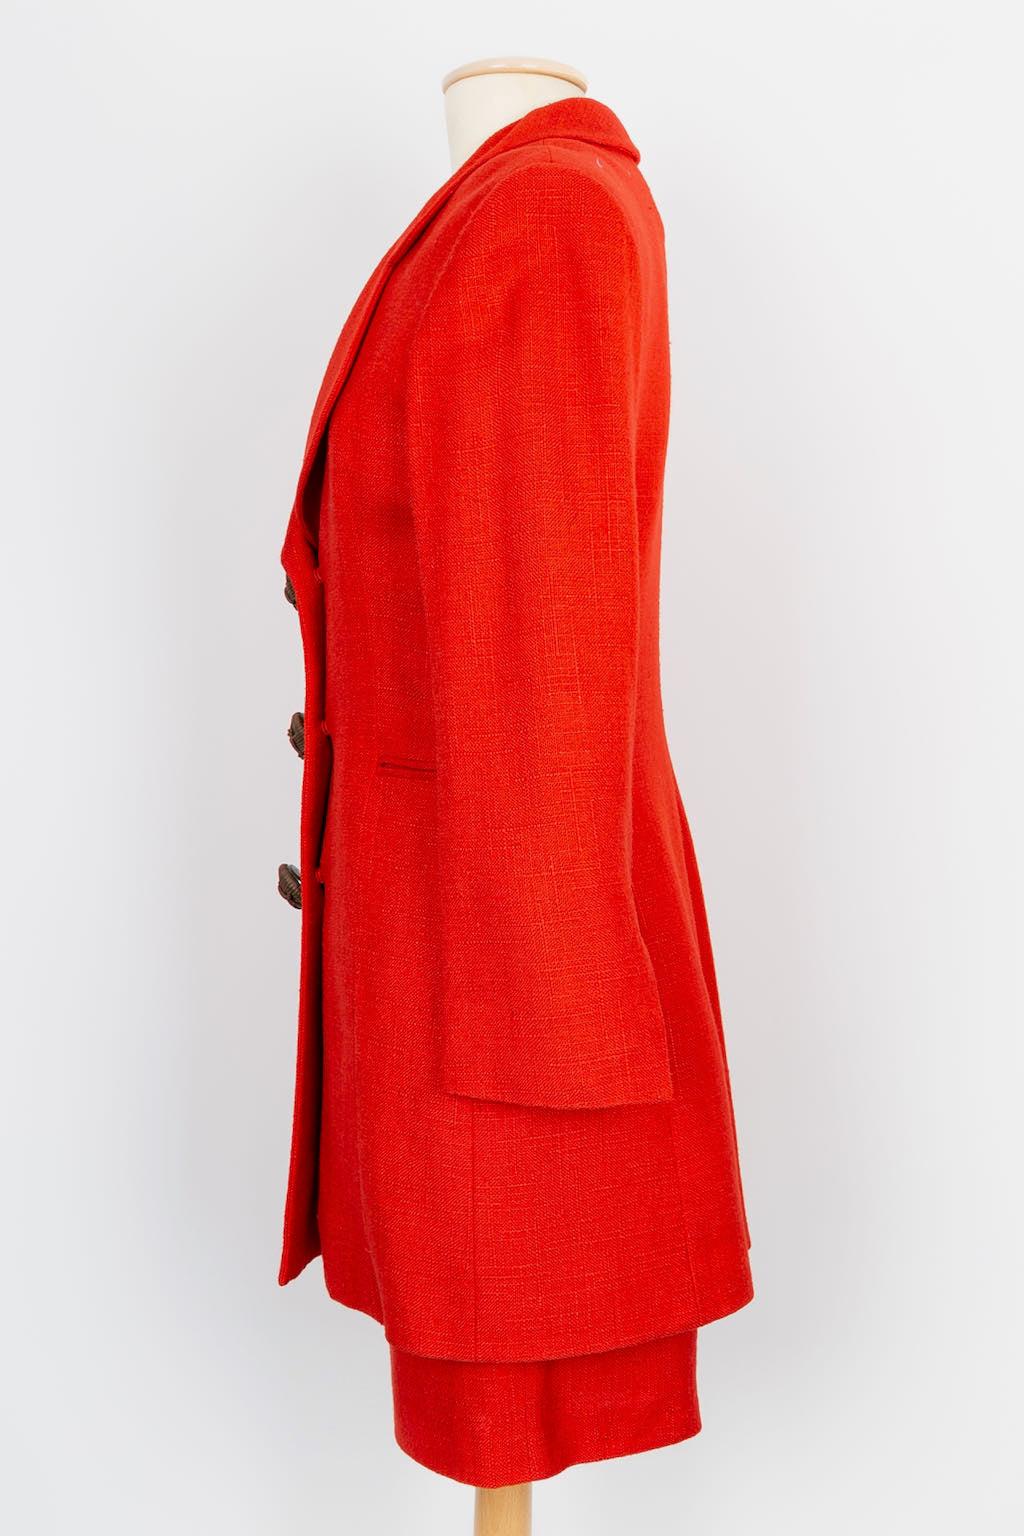 Dior -Red linen and cotton three-piece set with leather buttons. No composition label or size indicated, it fits 36FR.

Additional information: 
Dimensions: Jacket: Shoulder width: 44 cm, Chest: 45 cm, Sleeve length: 59 cm, Length: 83 cm 
Top: